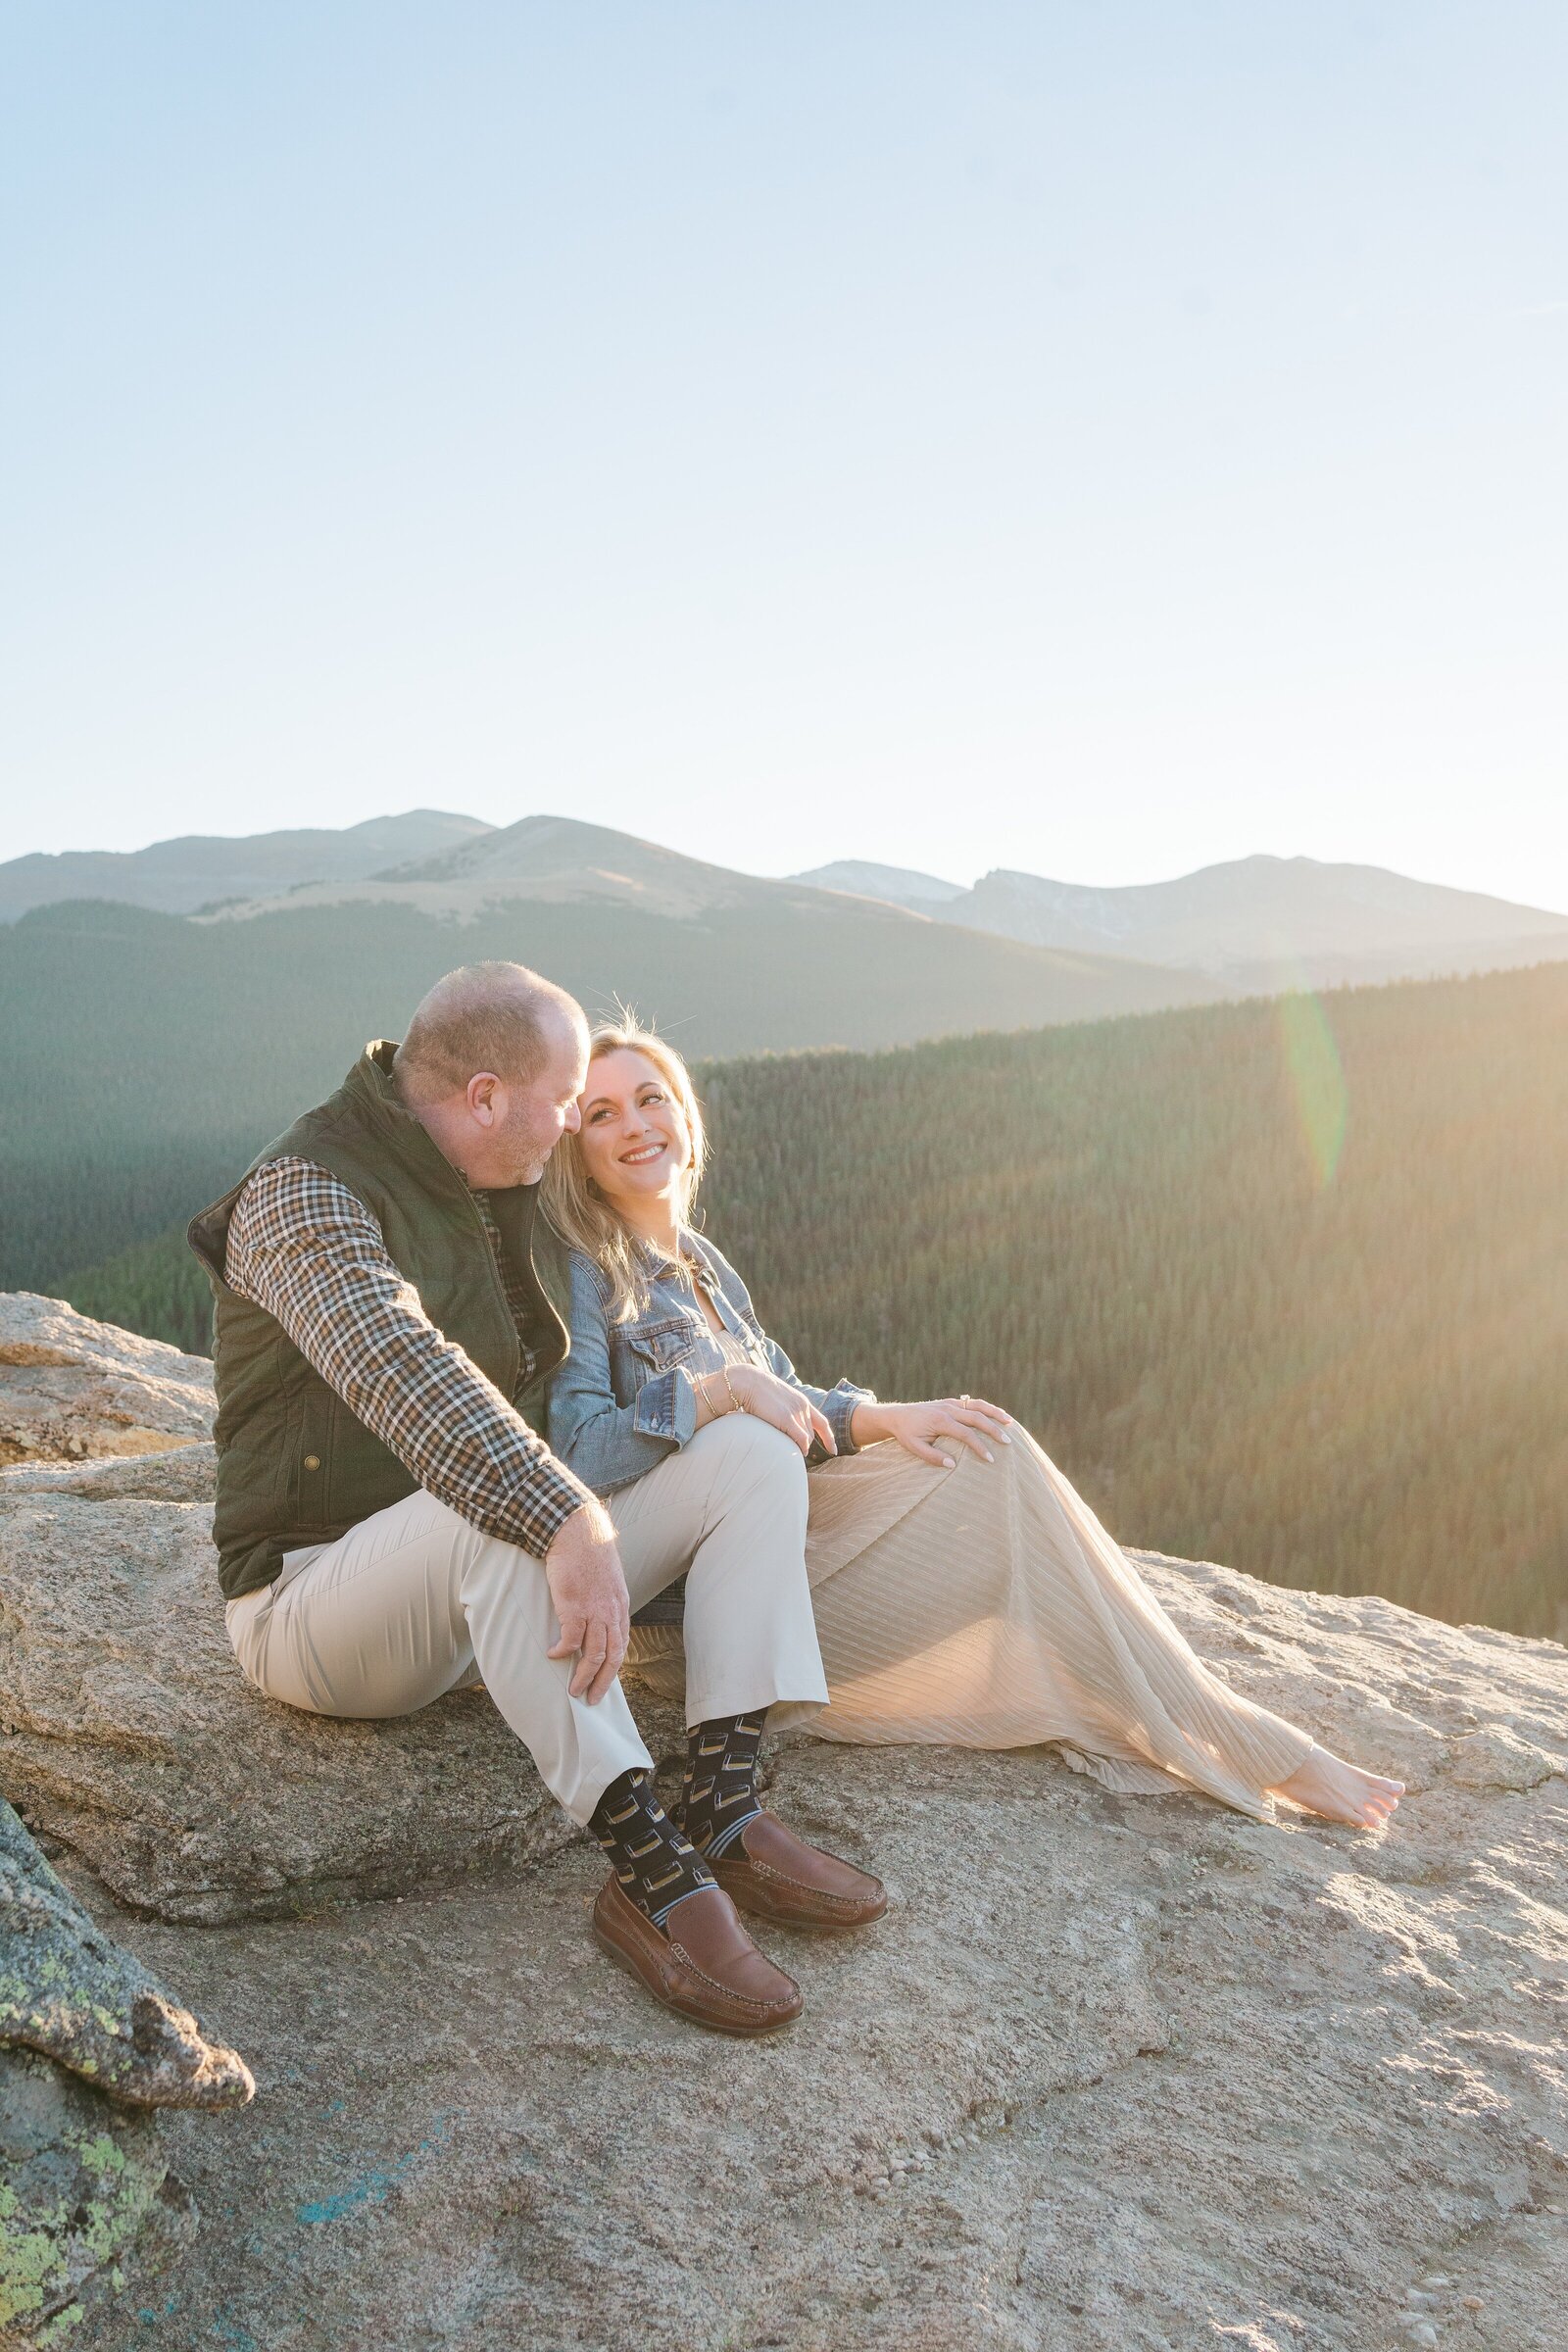 Say "I do" amidst the stunning beauty of Colorado's mountains with Samantha Immer Photography. Our natural light and scenic backdrop will create breathtaking wedding photos.